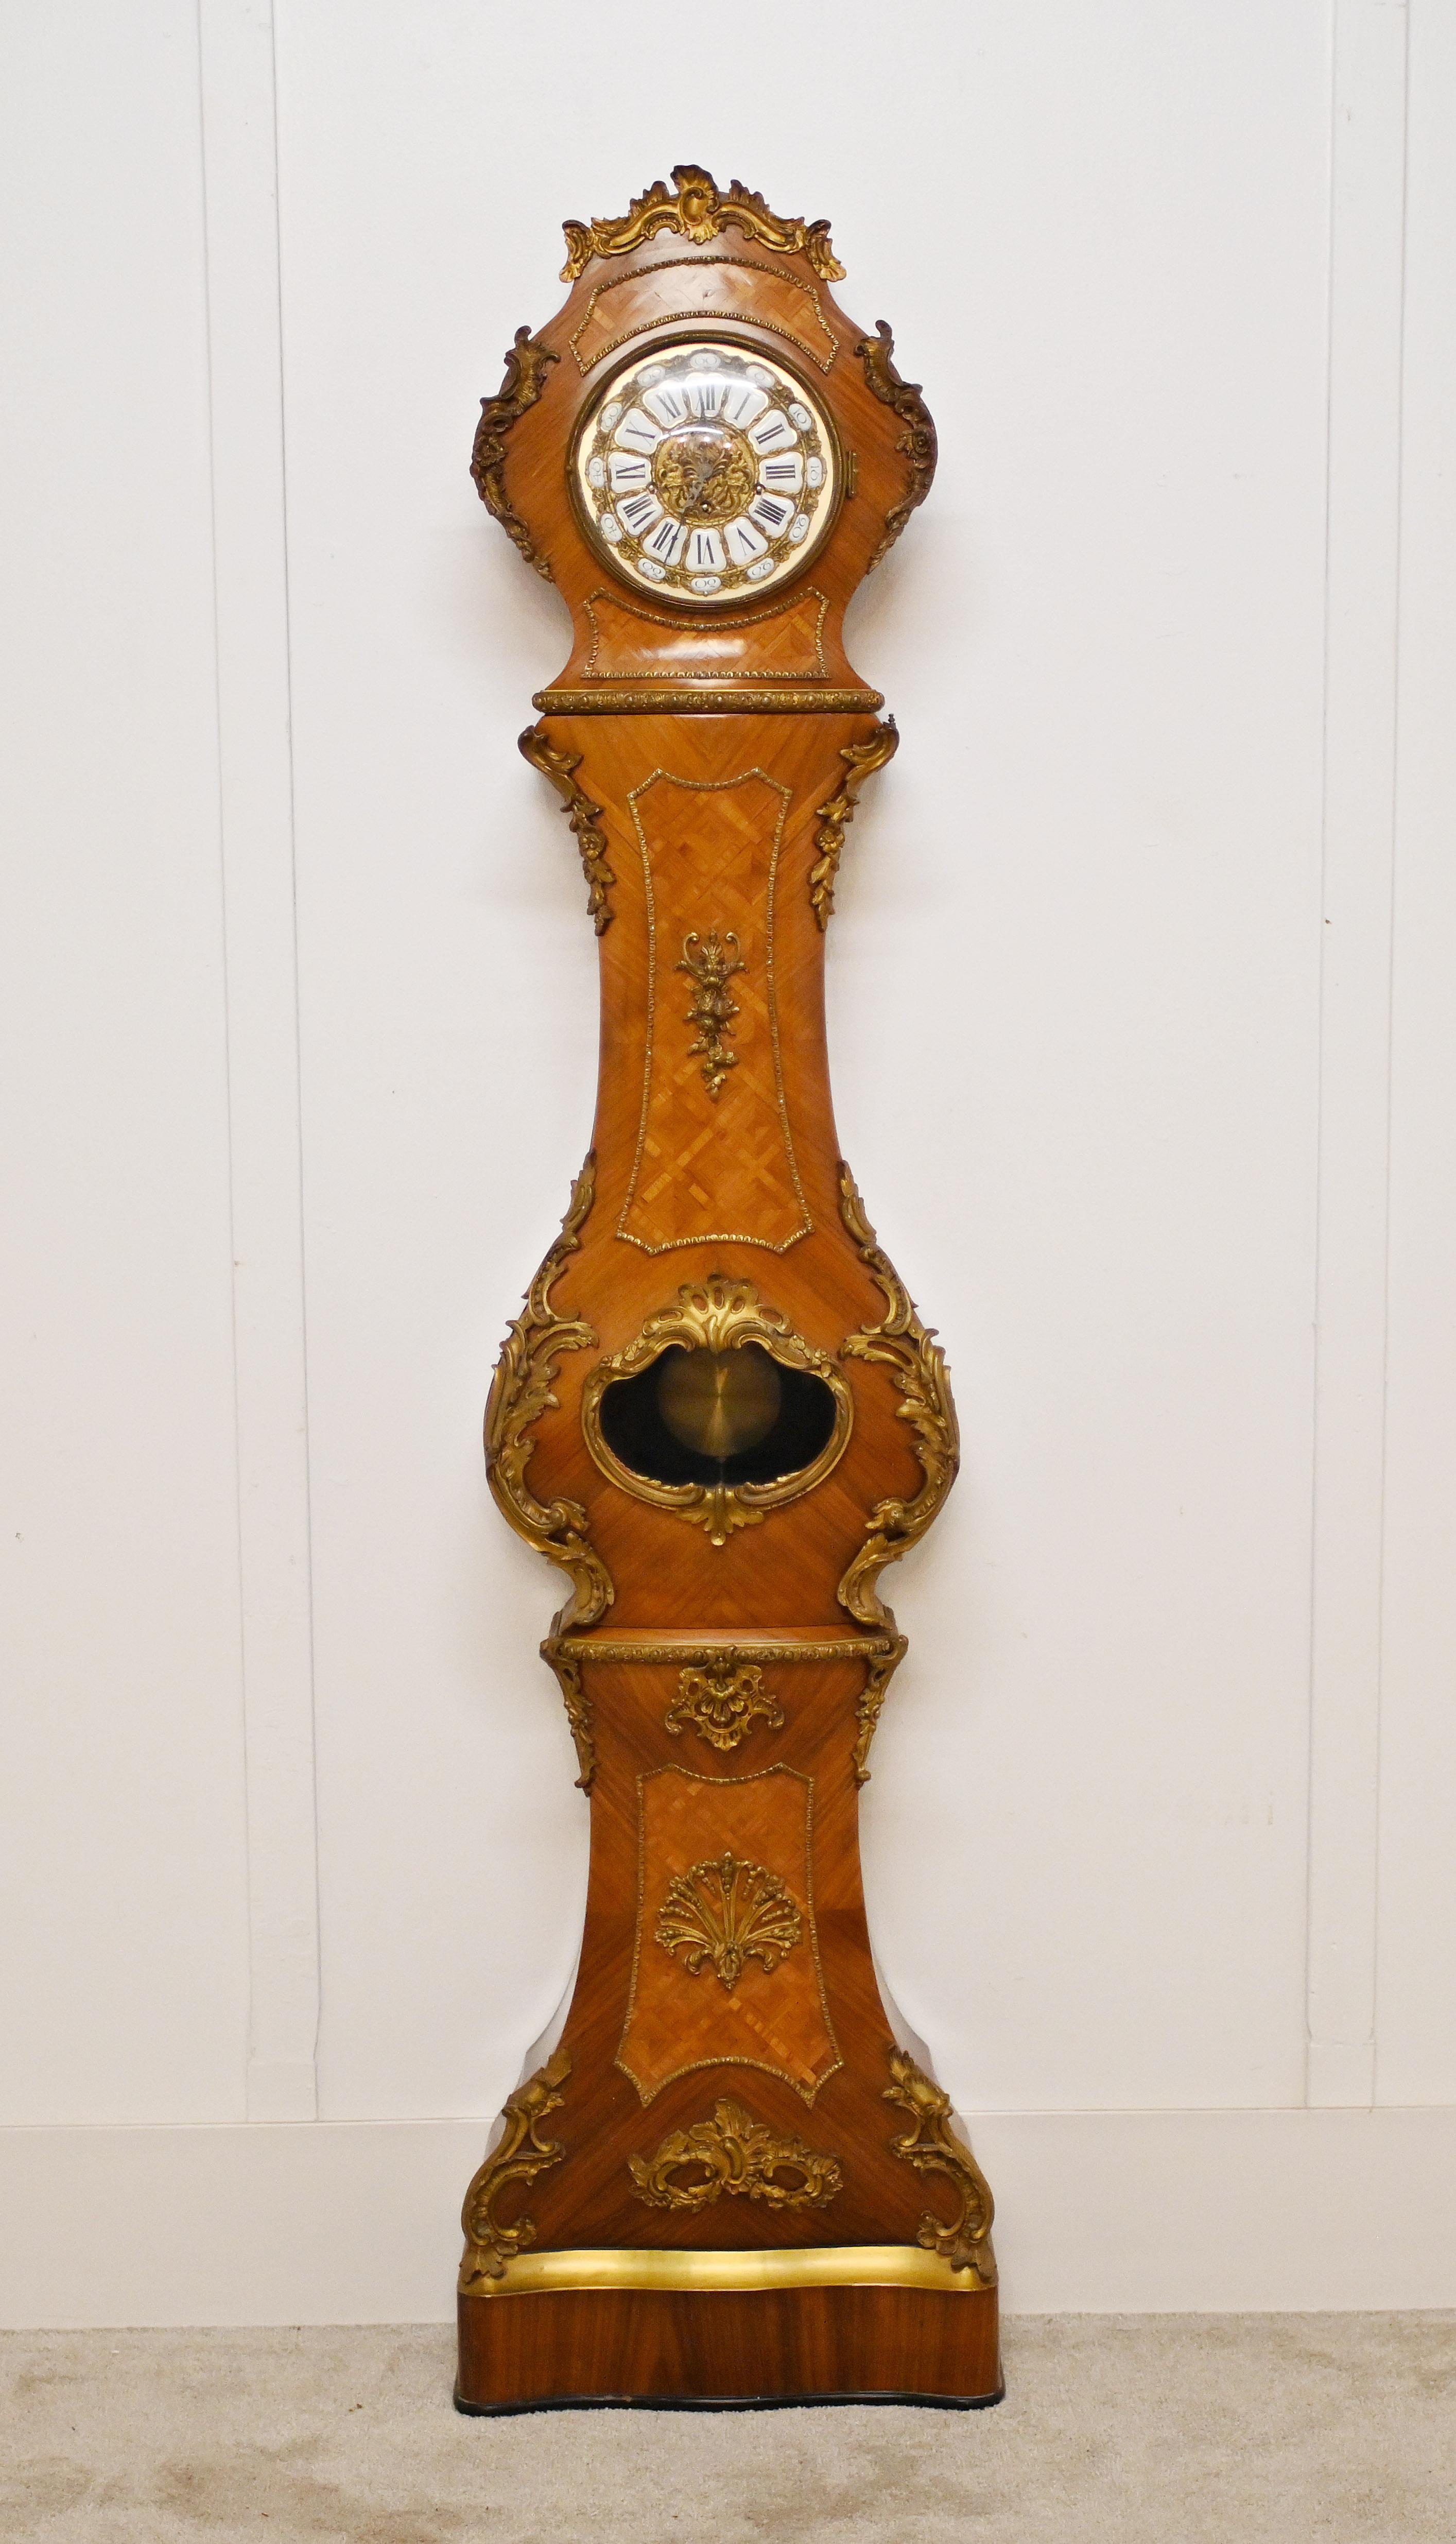 A gorgeous shaped French chimney Grandfather clock in kingwood  
Features marquetry inlays and best quality ormolu mounts 
Clock is in full working order
Circa 1930
Bought from a dealer on Rue Daphin at the Paris antiques markets
Offered in great